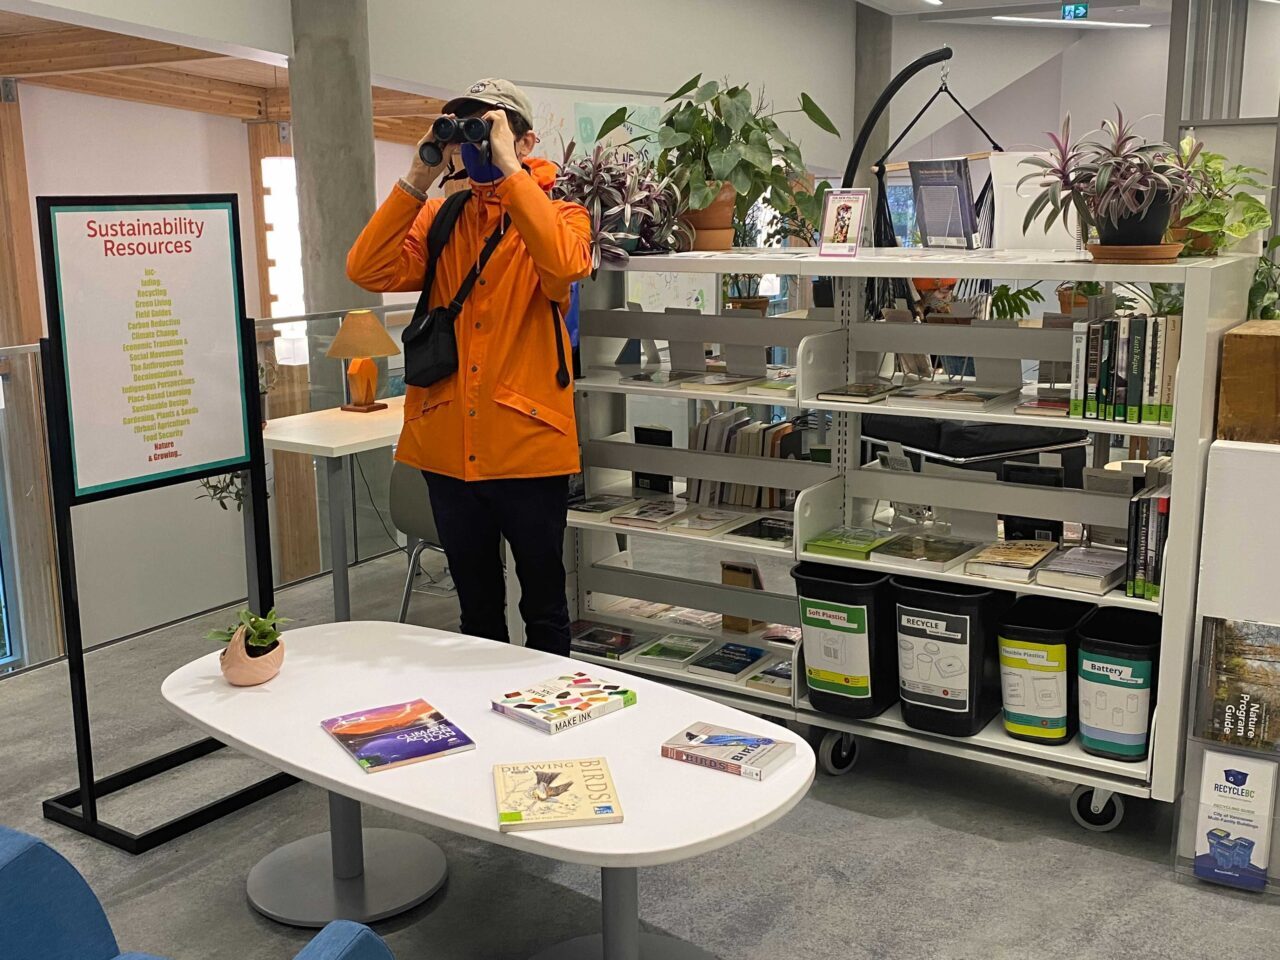 The ECU Library's Sustainability Resources Centre. A man in a orange coat holding a set of binoculars to his face in front of a book case featuring books and plants.